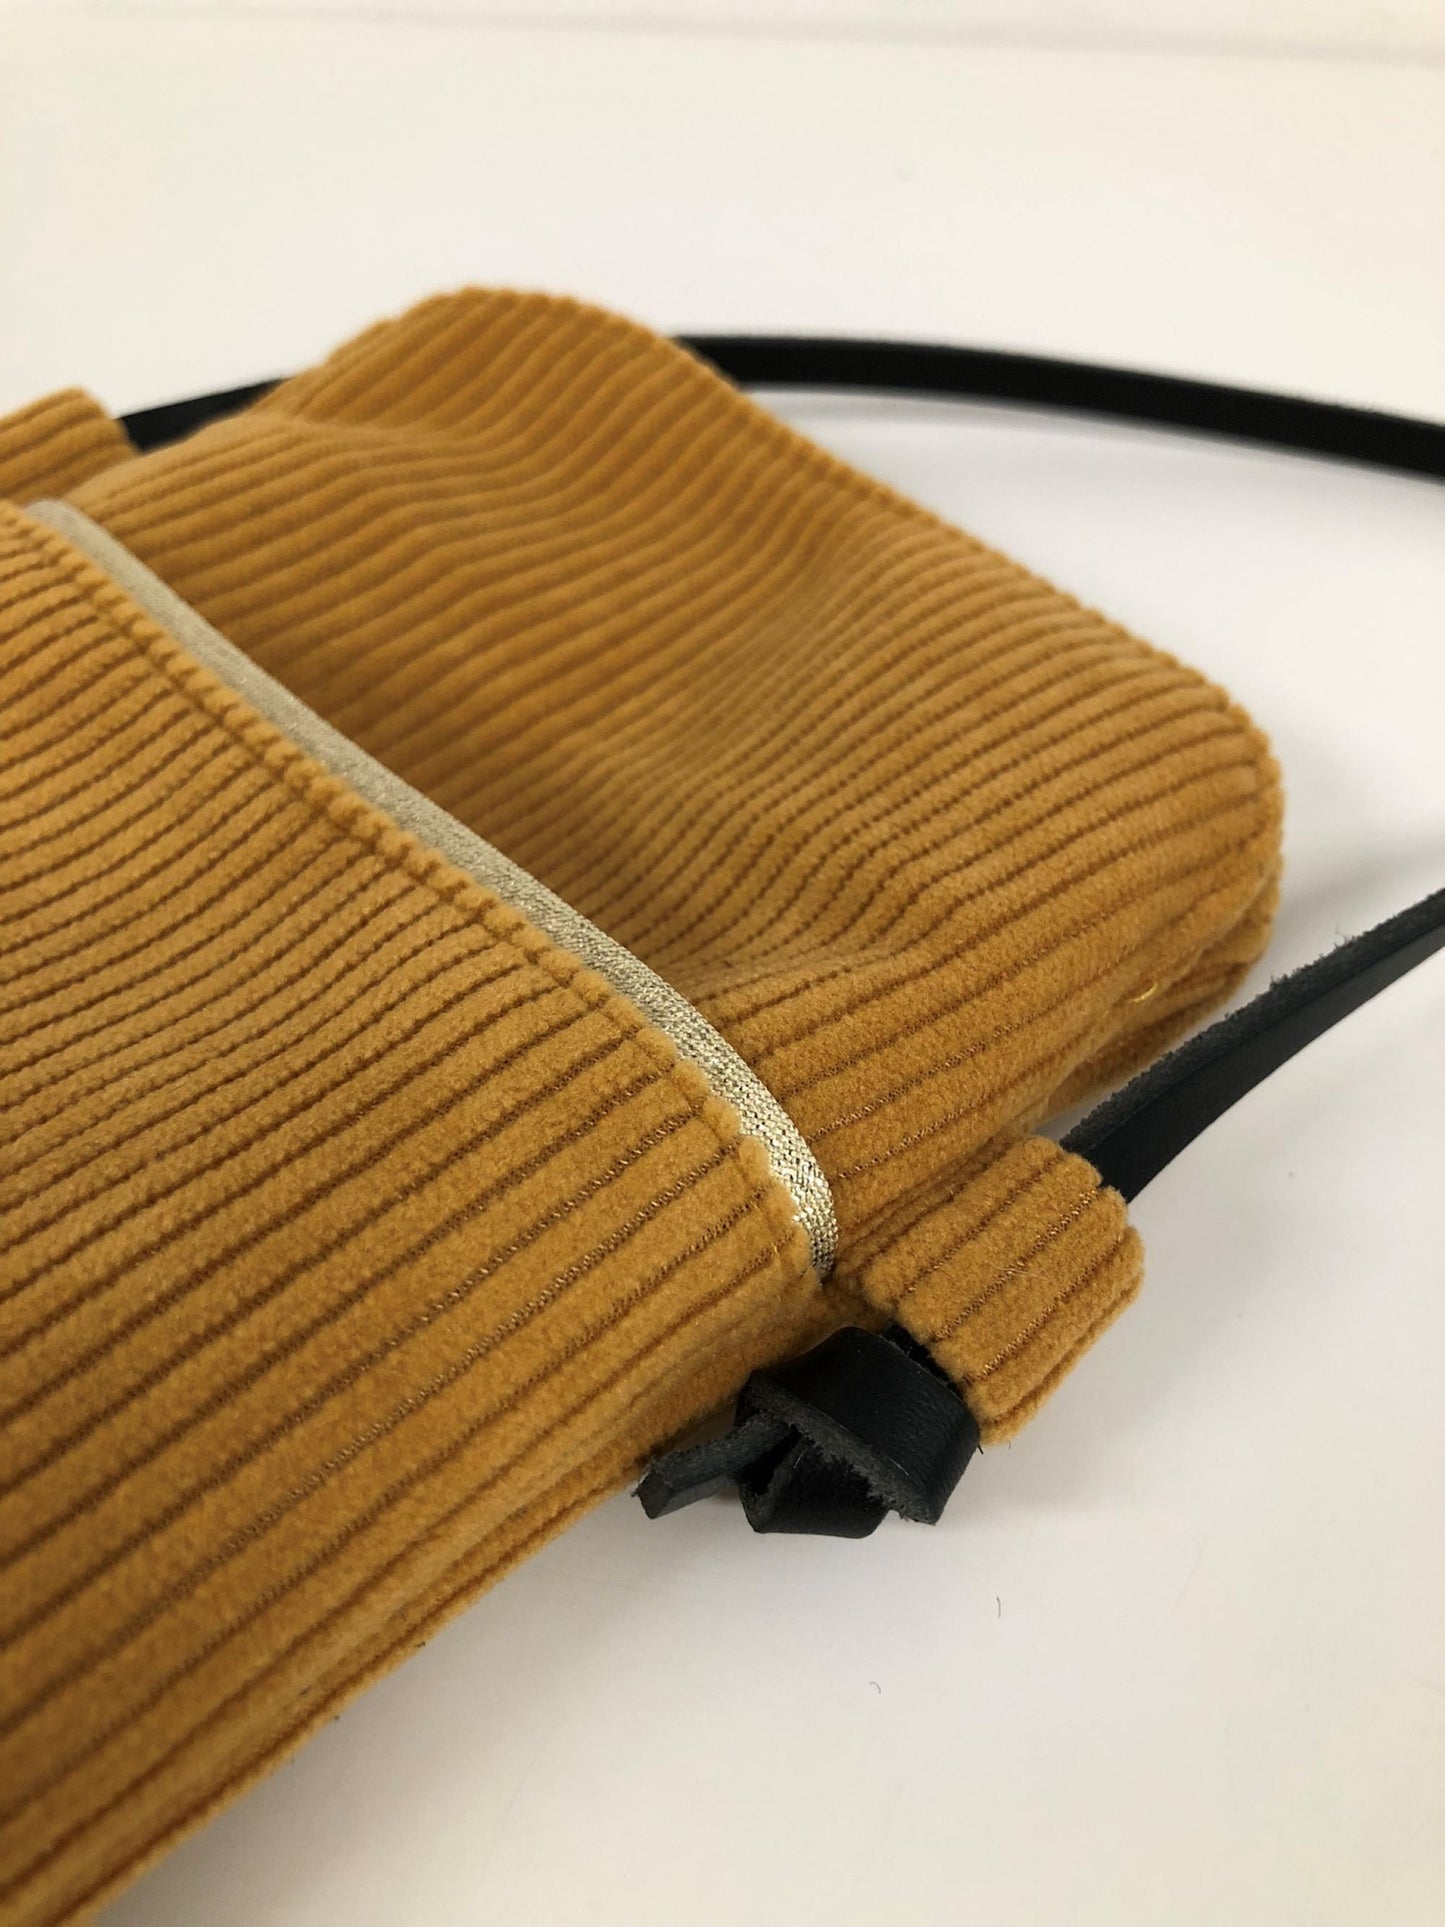 Shoulder phone pouch in mustard yellow corduroy and leather